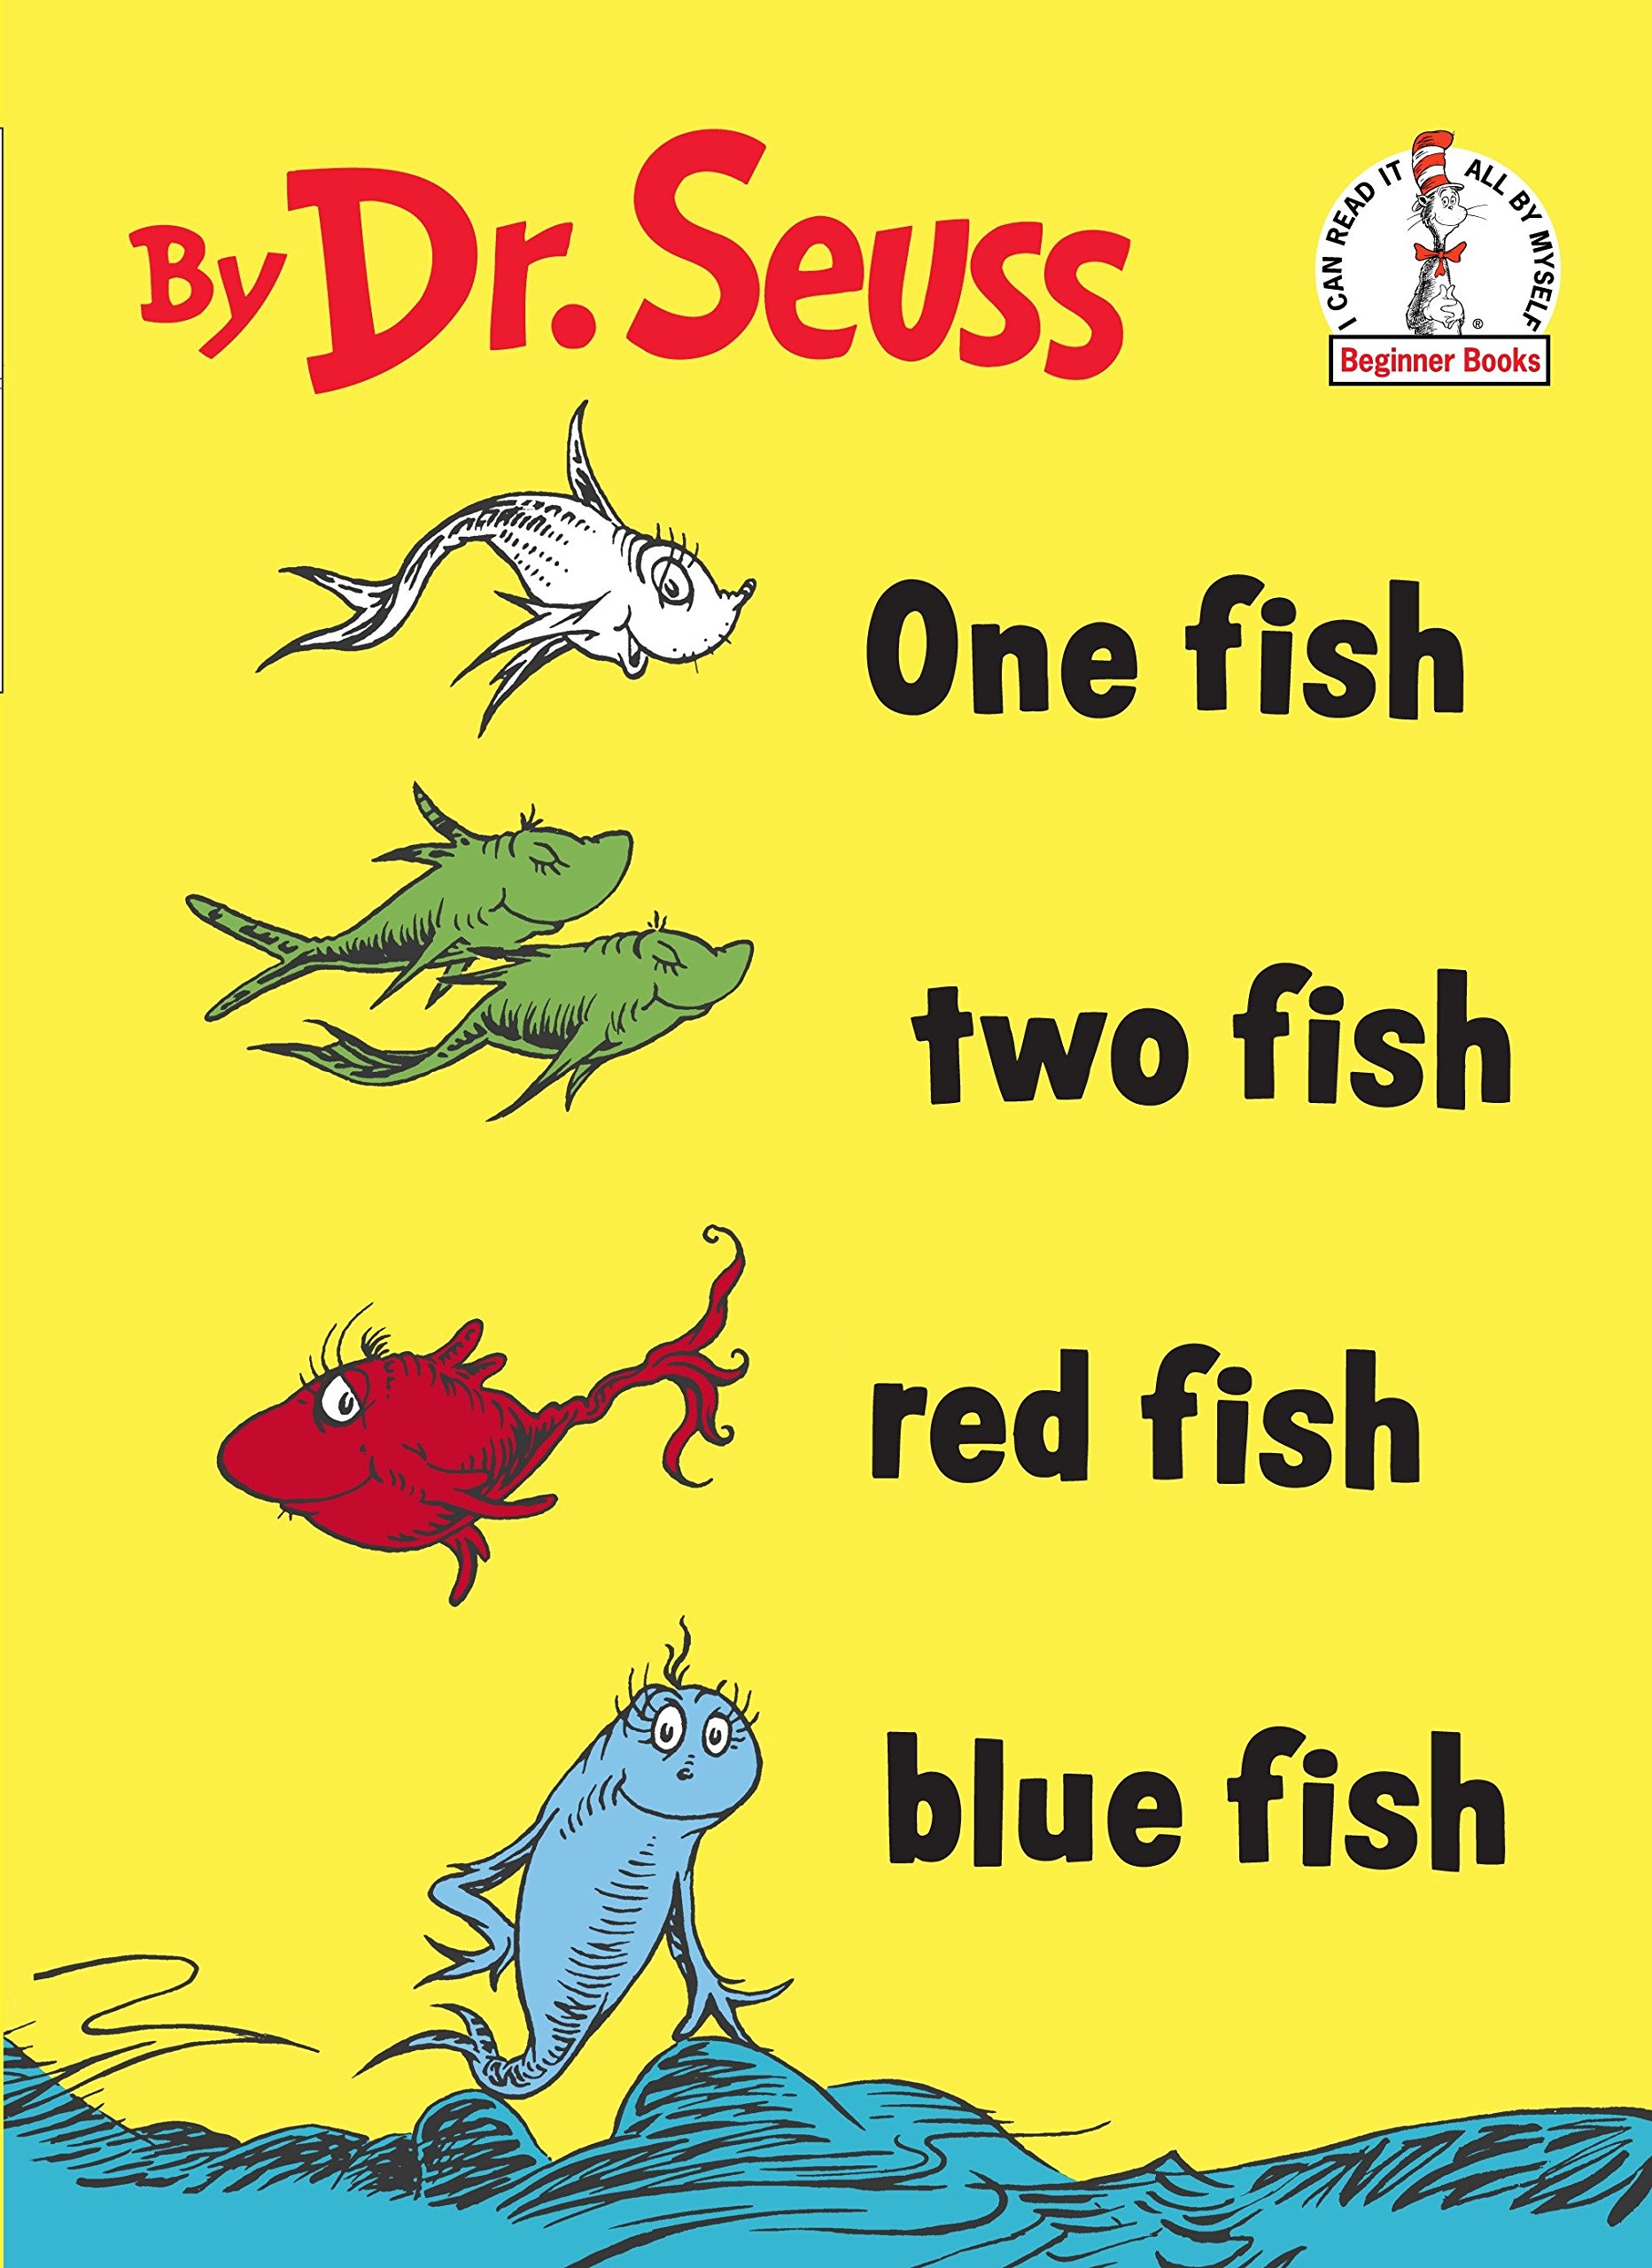 "One Fish Two Fish Red Fish Blue Fish" by Dr. Seuss